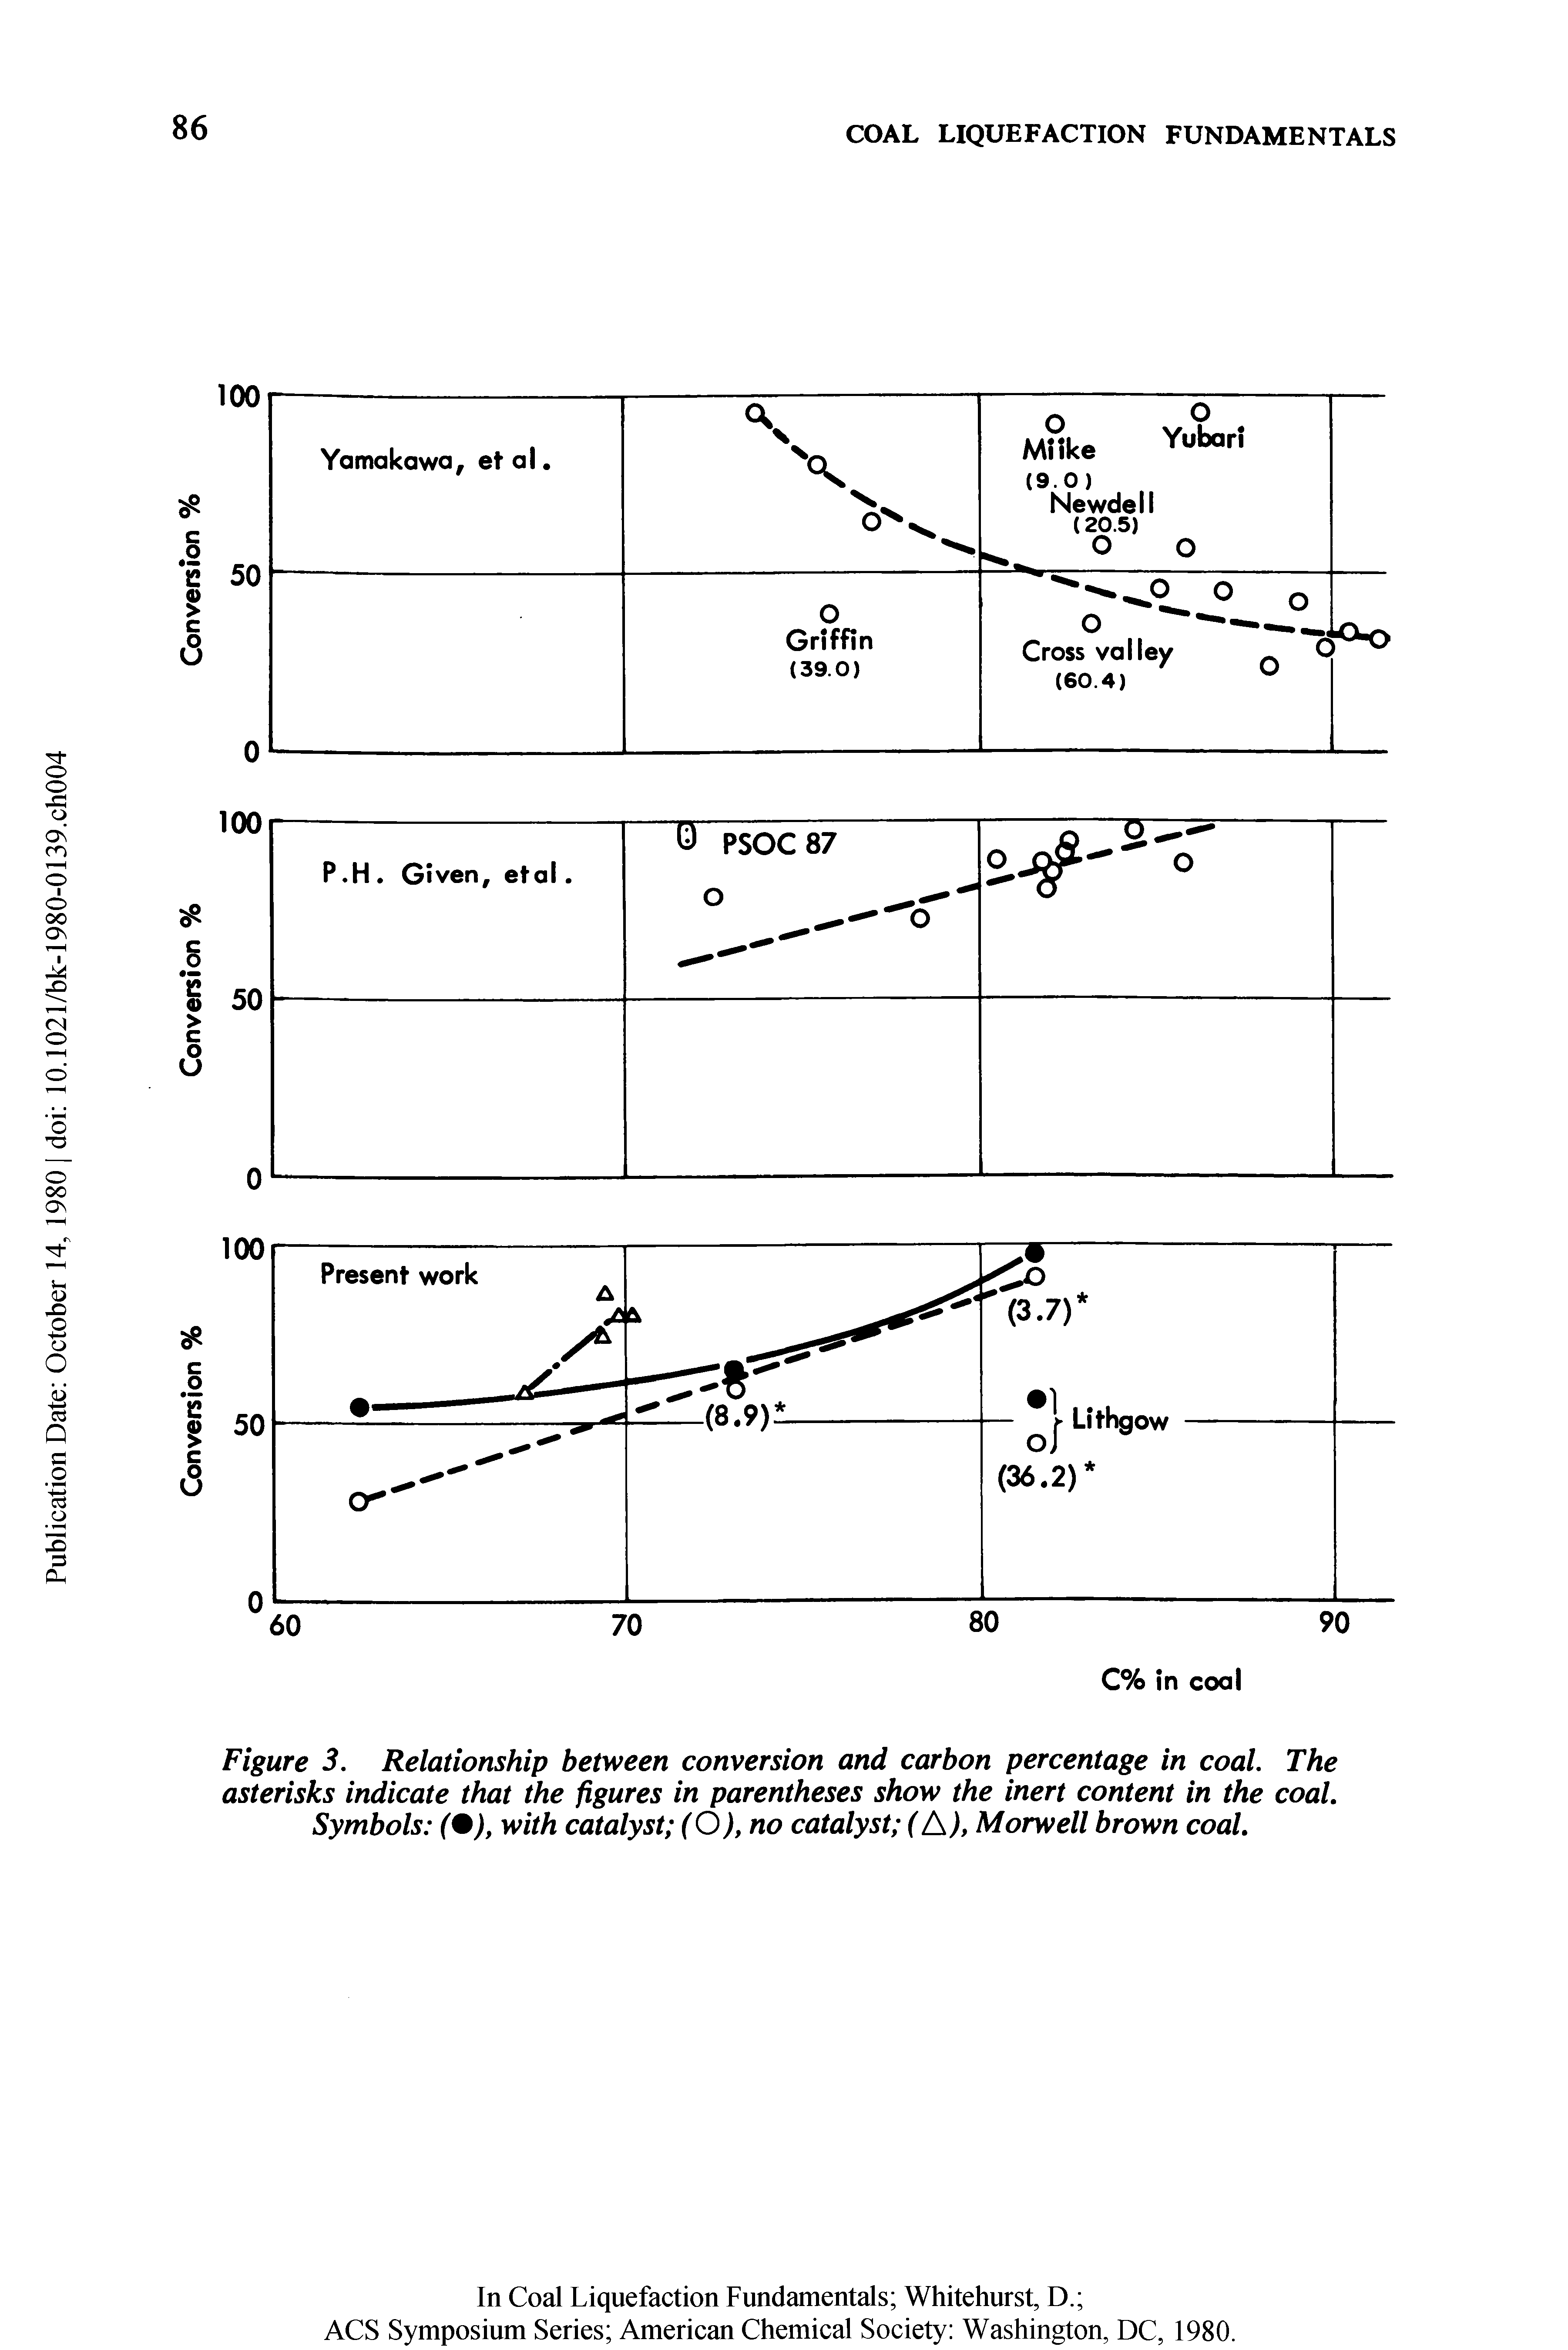 Figure 3. Relationship between conversion and carbon percentage in coal. The asterisks indicate that the figures in parentheses show the inert content in the coal. Symbols (%), with catalyst (O), no catalyst (A), Morwell brown coal.